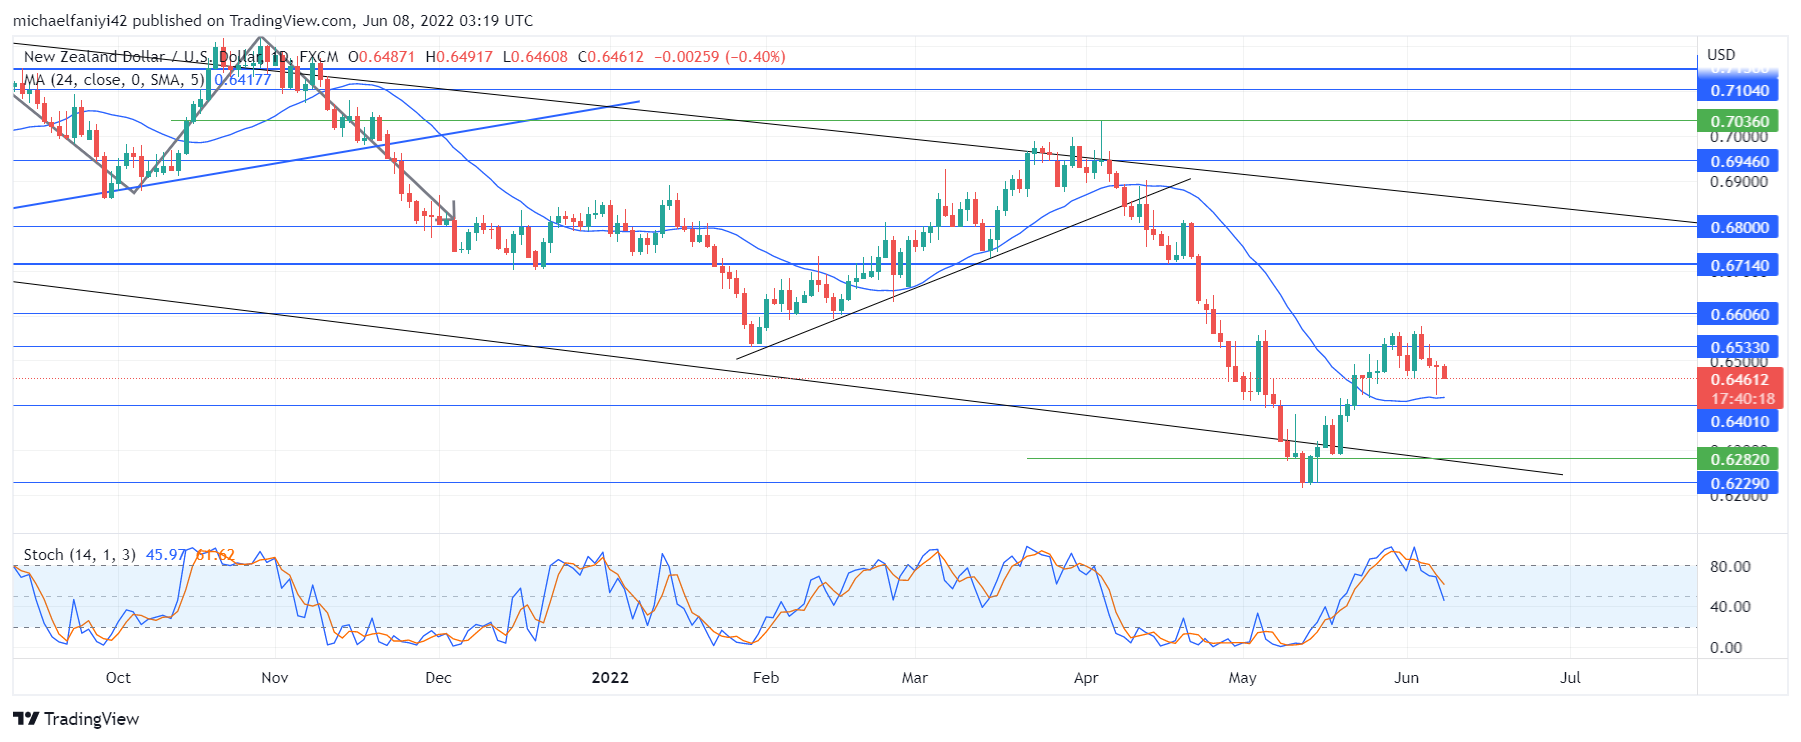 NZDUSD Pulls Back for Support at the 0.64010 Price Level